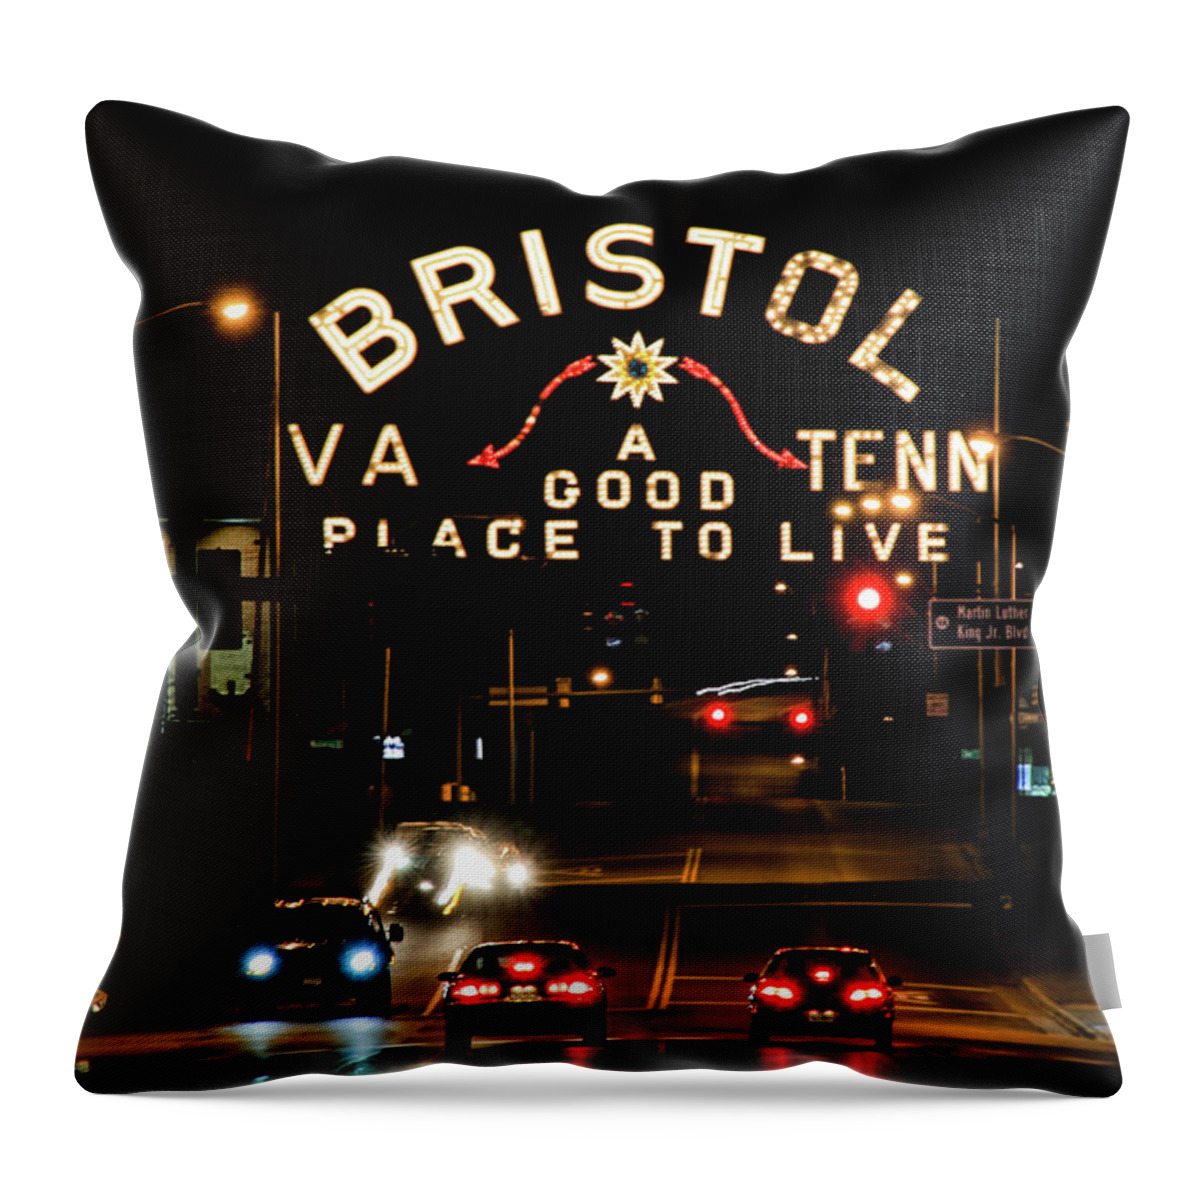 Bristol Throw Pillow featuring the photograph A Good Place To Live by Dale R Carlson